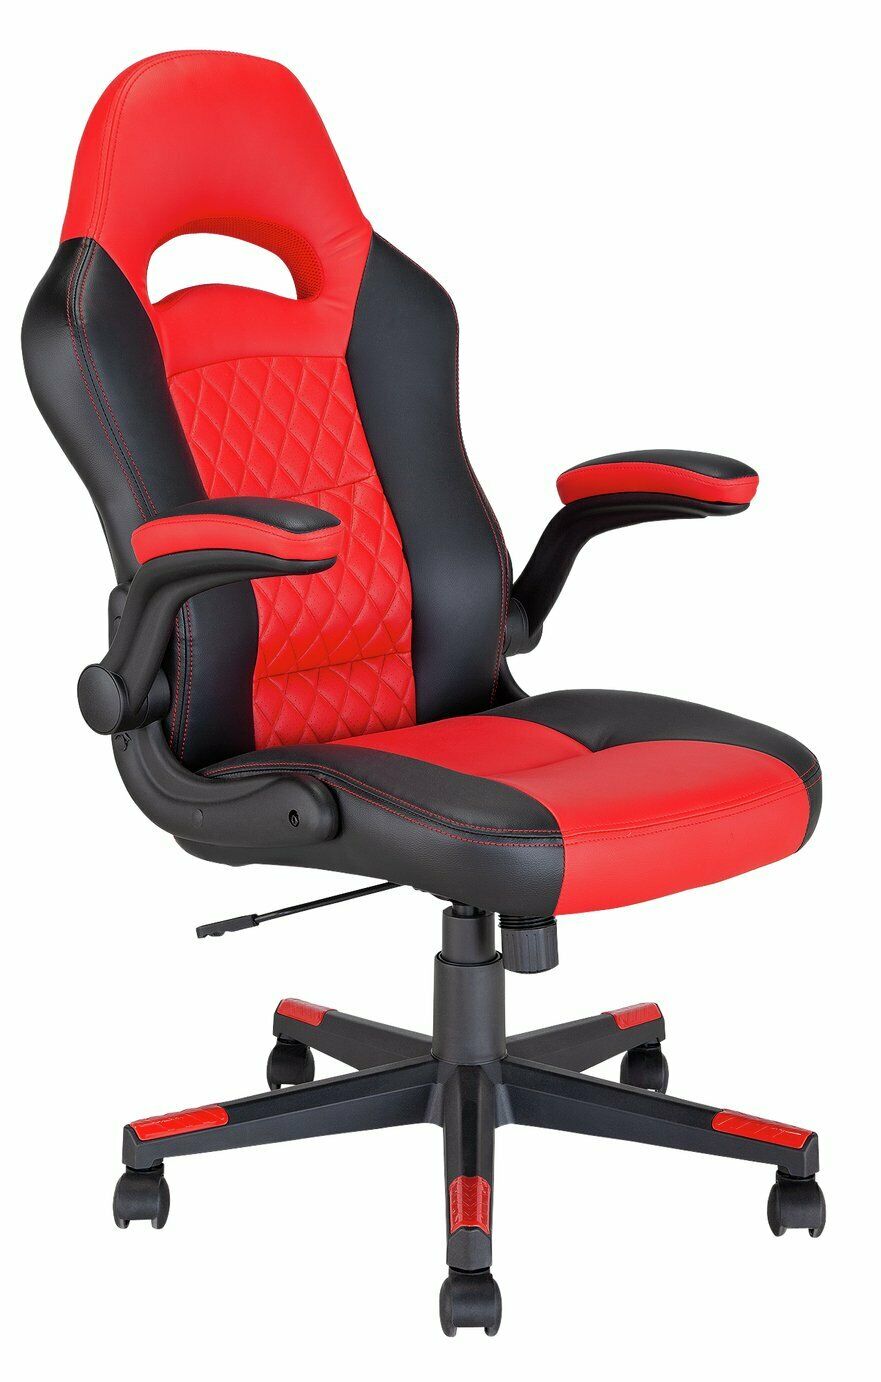 Home Raptor Faux Leather Ergonomic Gaming Chair - Black & Red